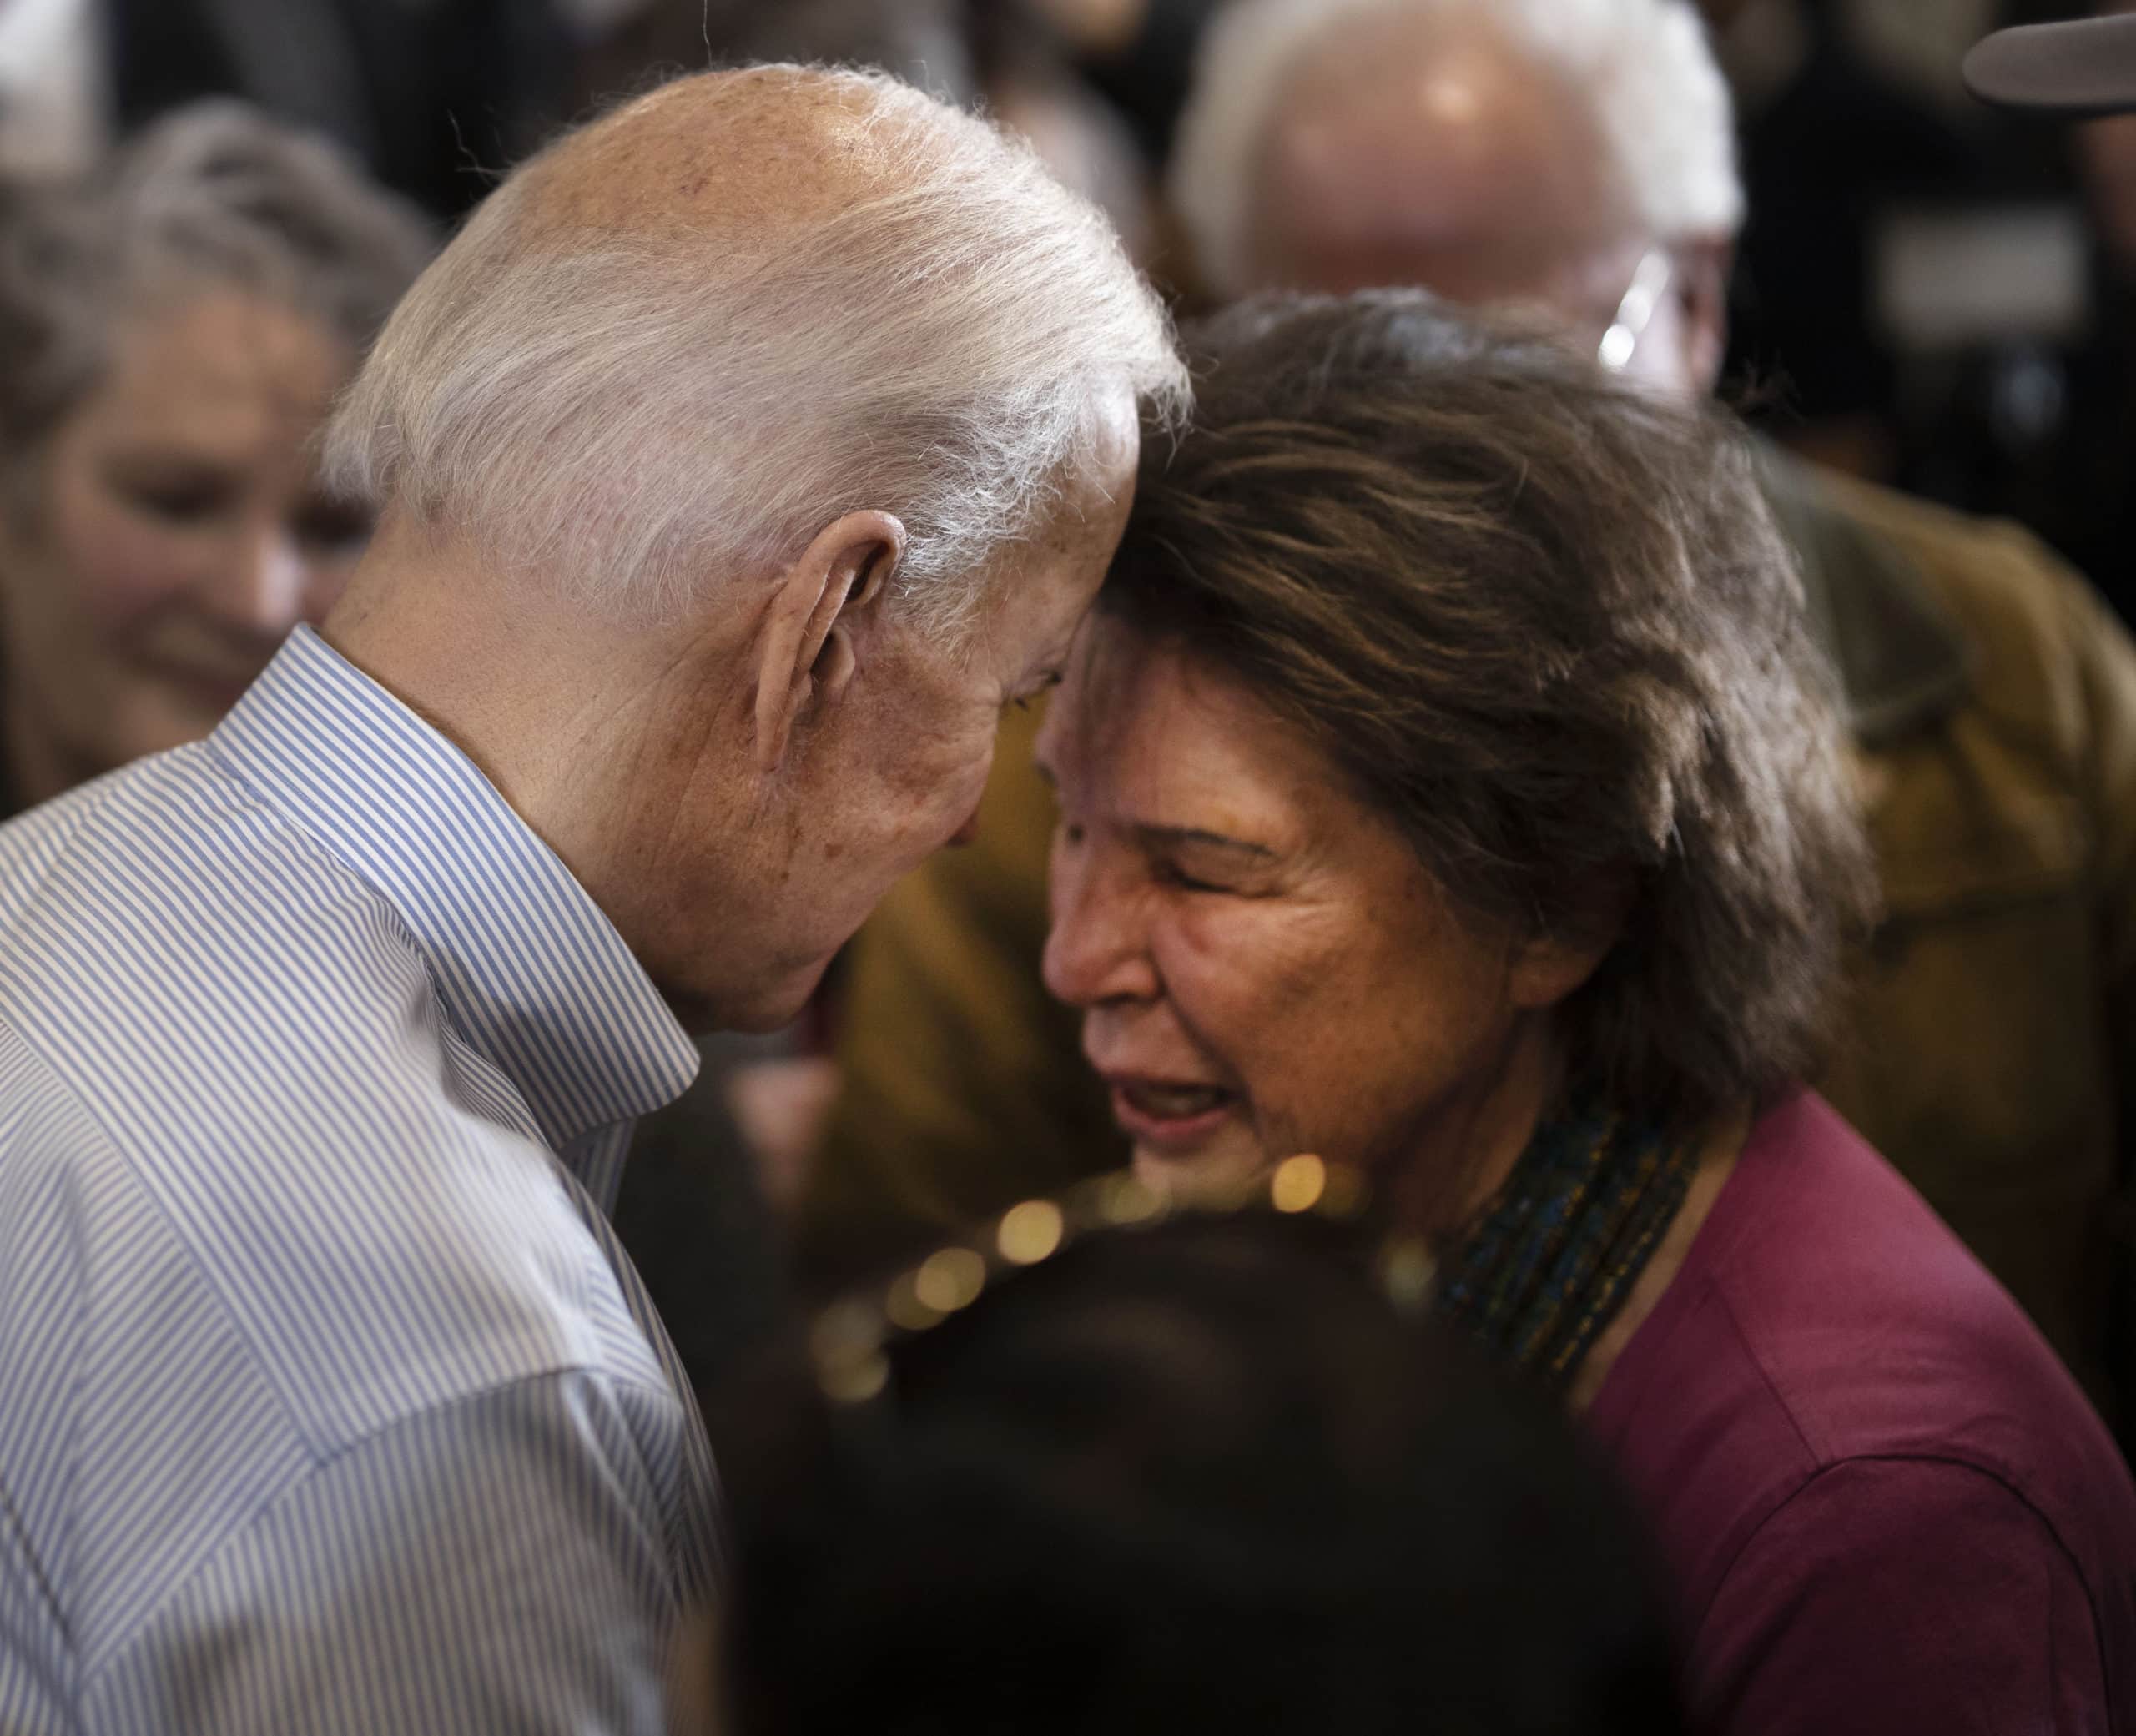 Democratic presidential candidate former Vice President Joe Biden has some comforting words for a woman who suffered a recent loss as he campaigned in Hampton, New Hampshire, February 9, 2020. Biden went on to win the Democratic nomination.